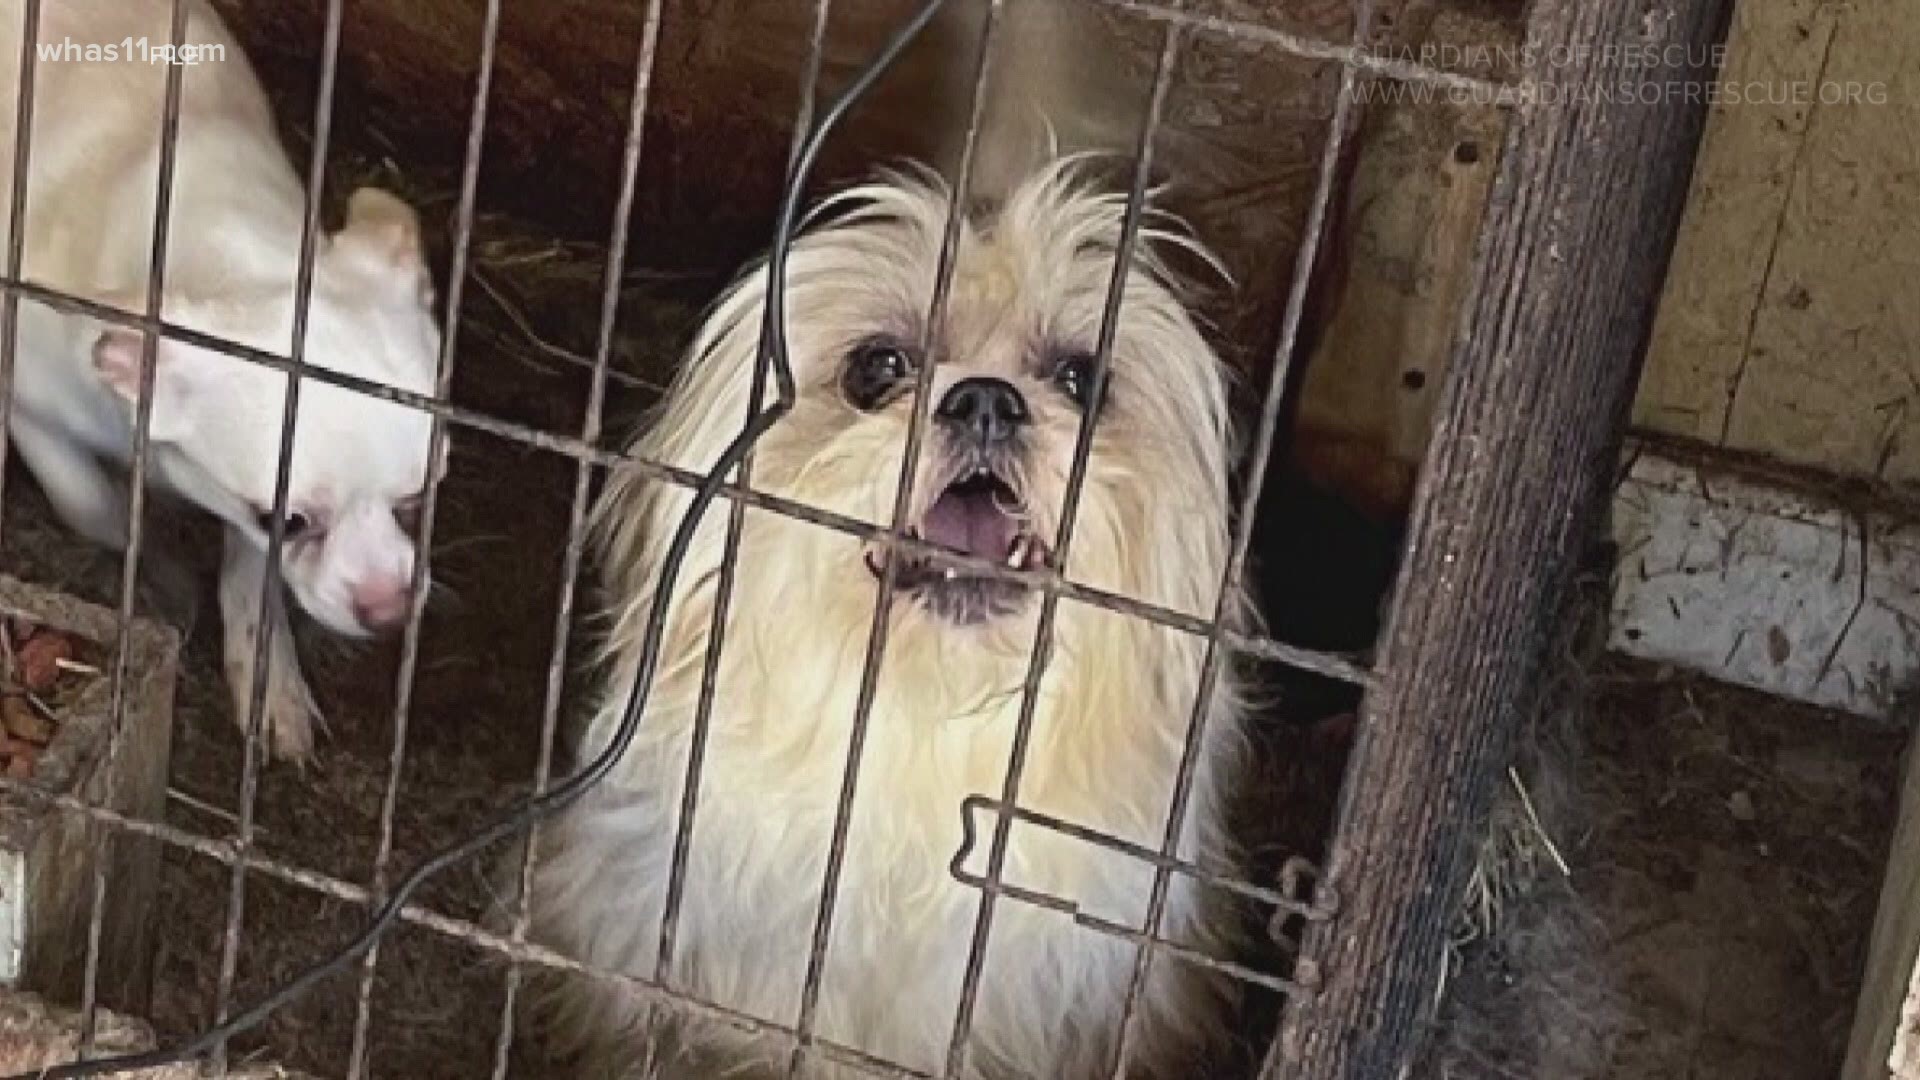 In Kentucky, there have been at least five significant animal rescues in the last two months, including an alleged puppy mill bust.